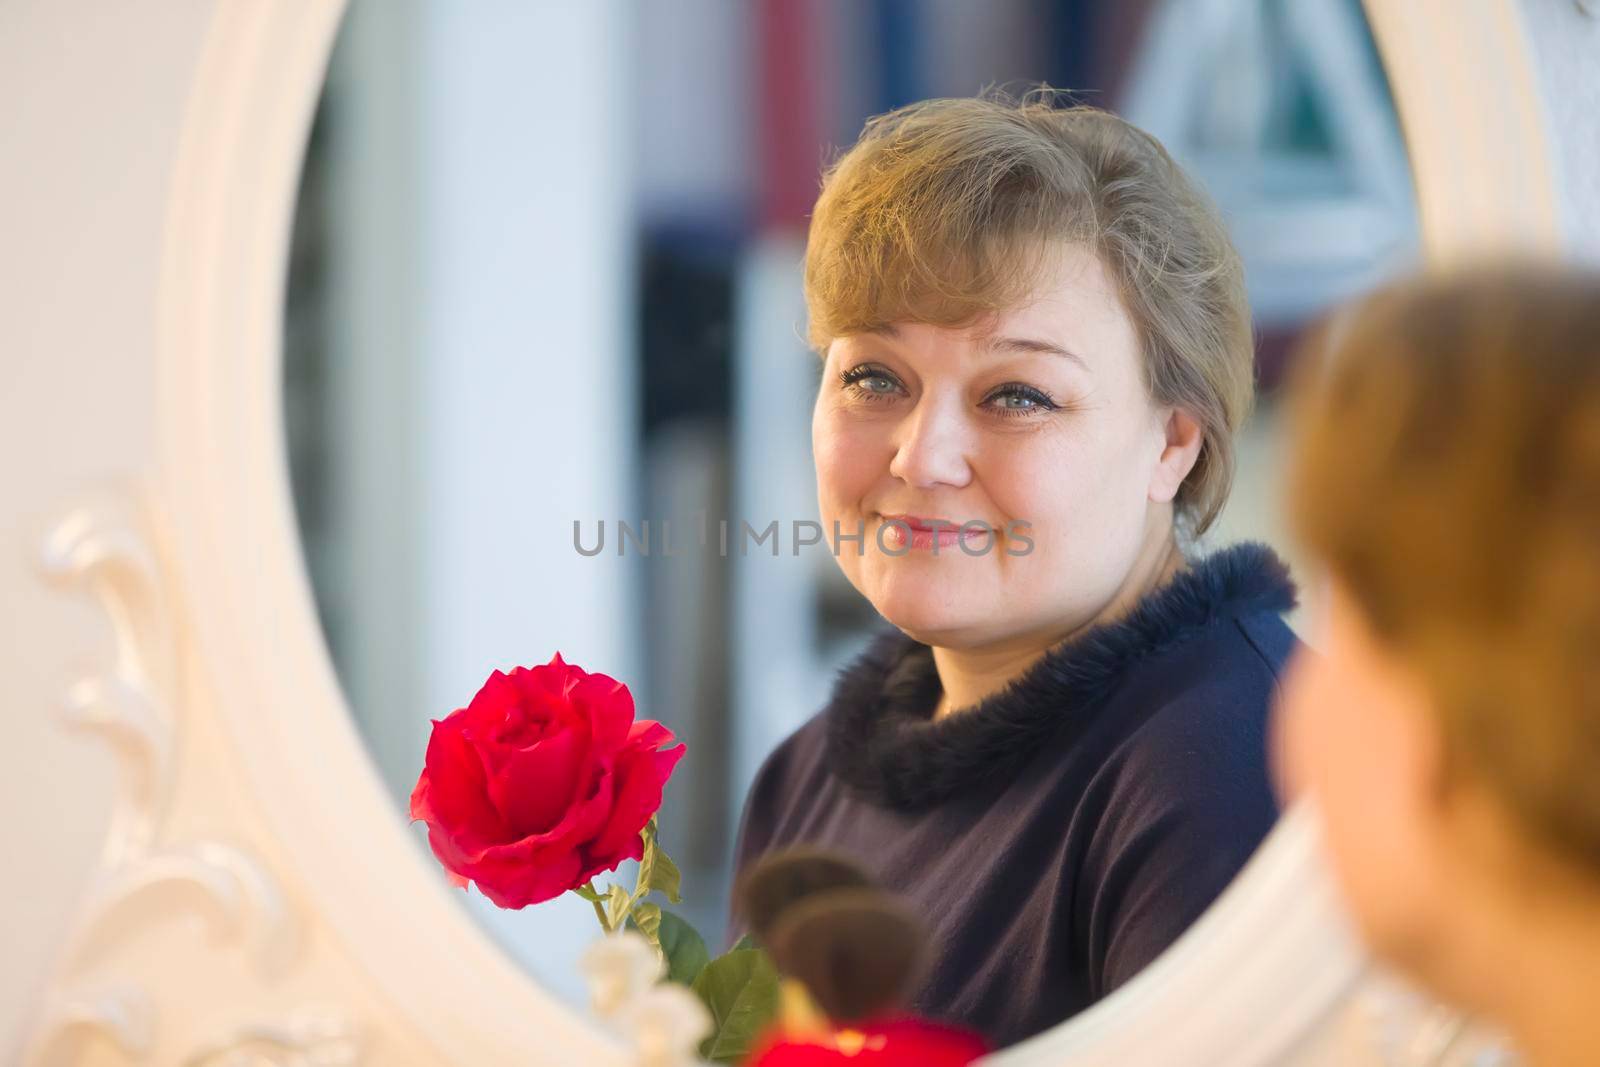 An ordinary full lonely woman with a rose looks in the mirror. Middle age crisis by Sviatlana